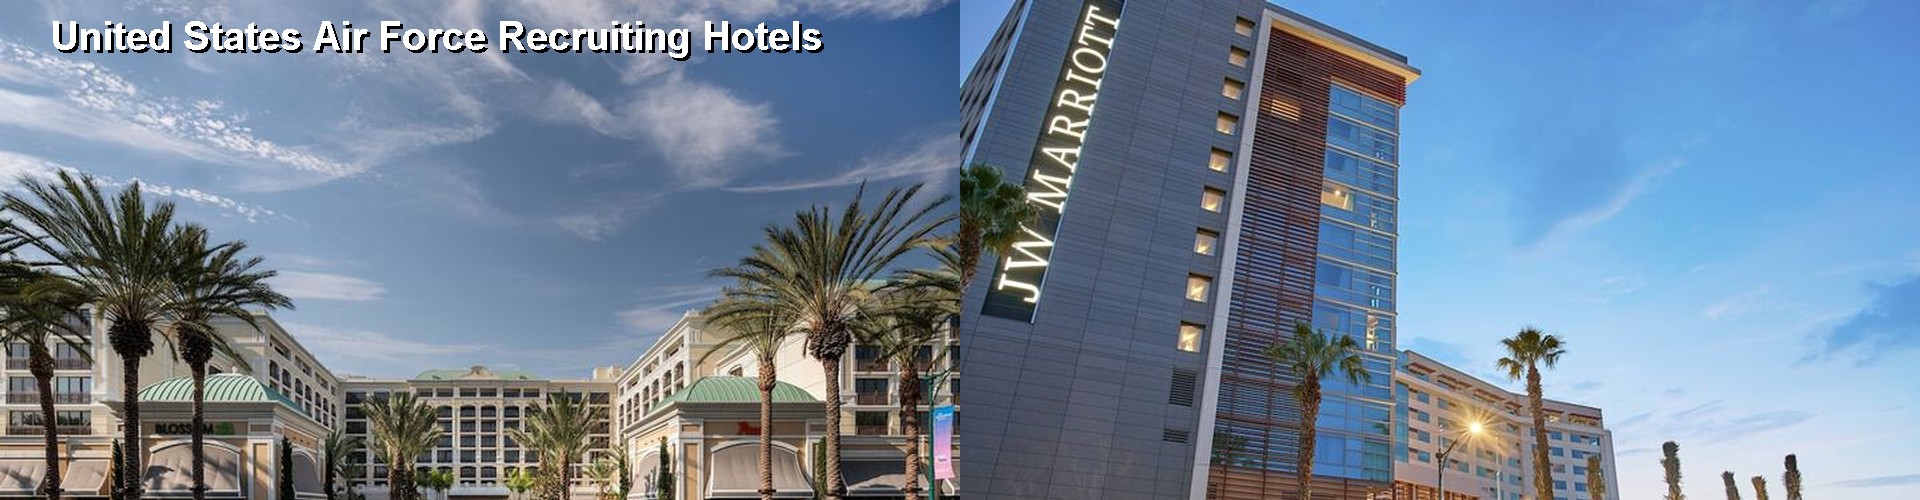 5 Best Hotels near United States Air Force Recruiting